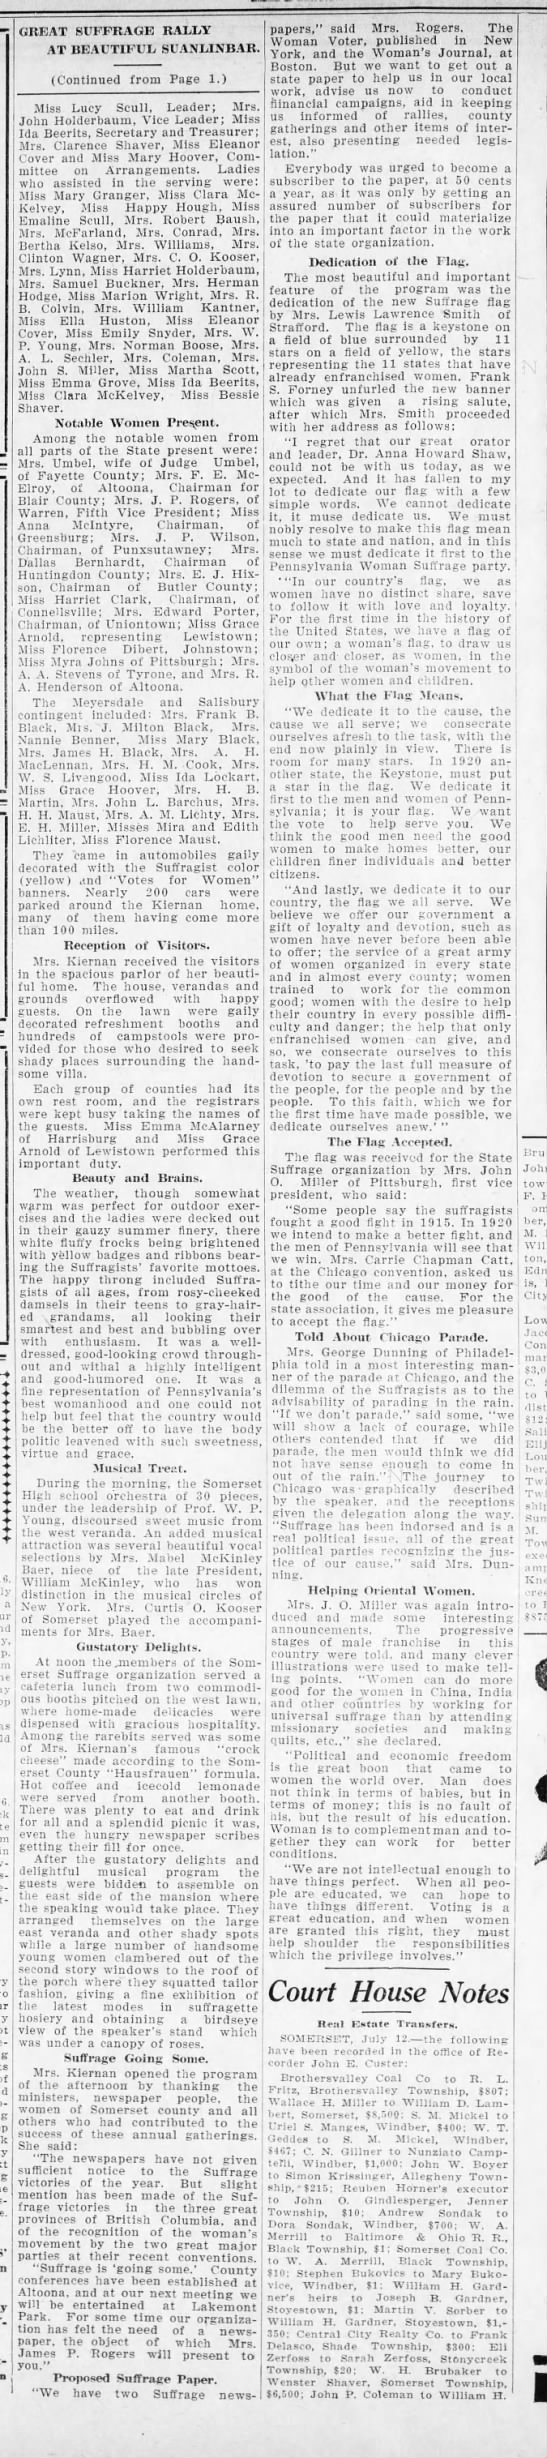 Meyersdale Republican report about Suffrage Rally in Somerset, continued - 